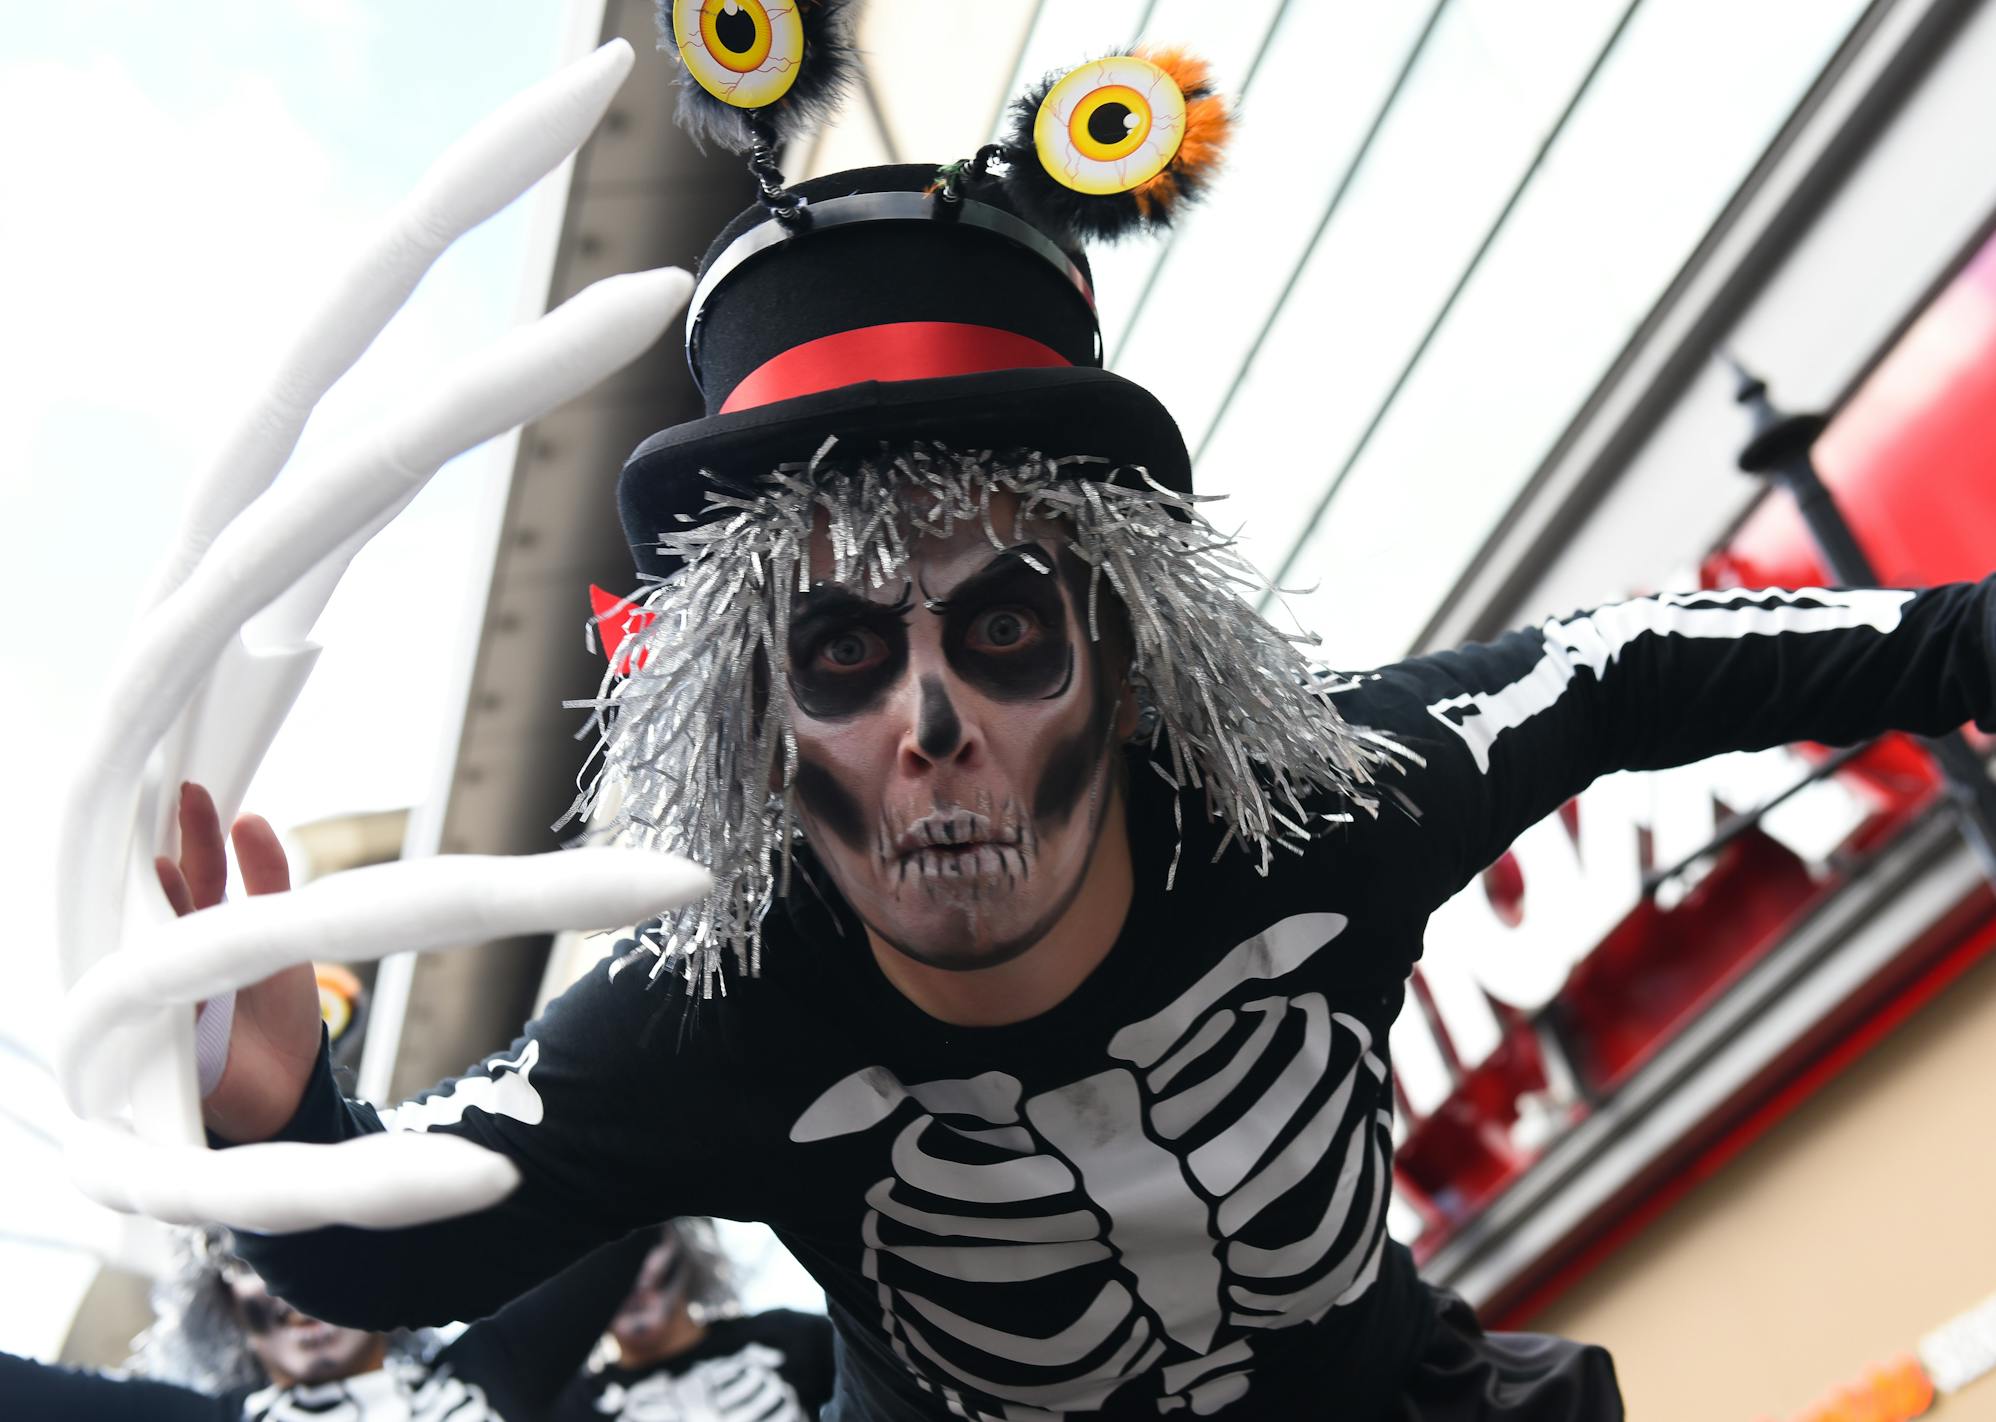 A performer in skeleton make-up leaning towards the camera